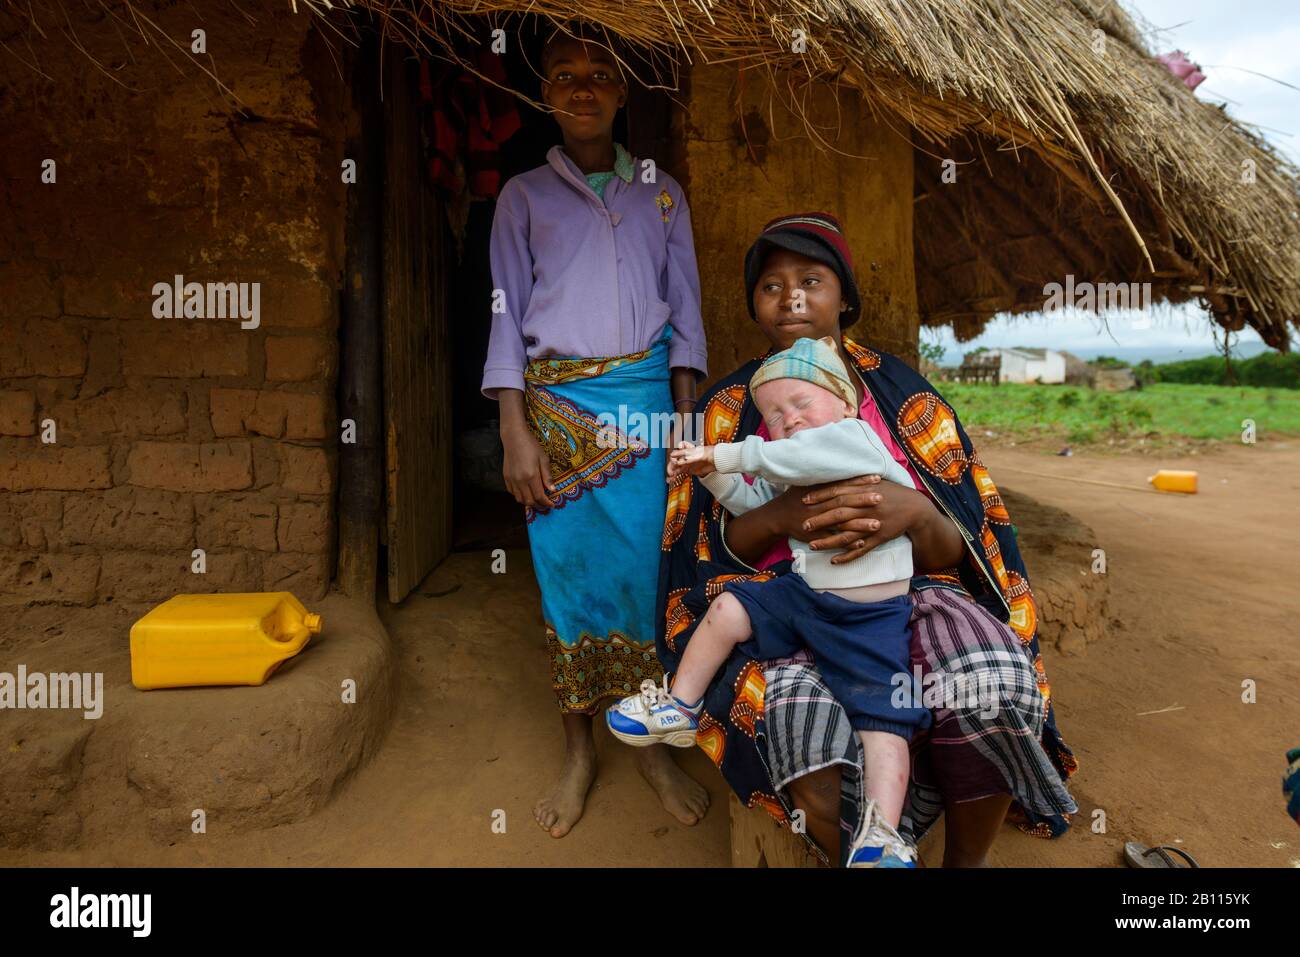 Woman with albino boy sits in front of her straw hut, Mozambique, Africa Stock Photo